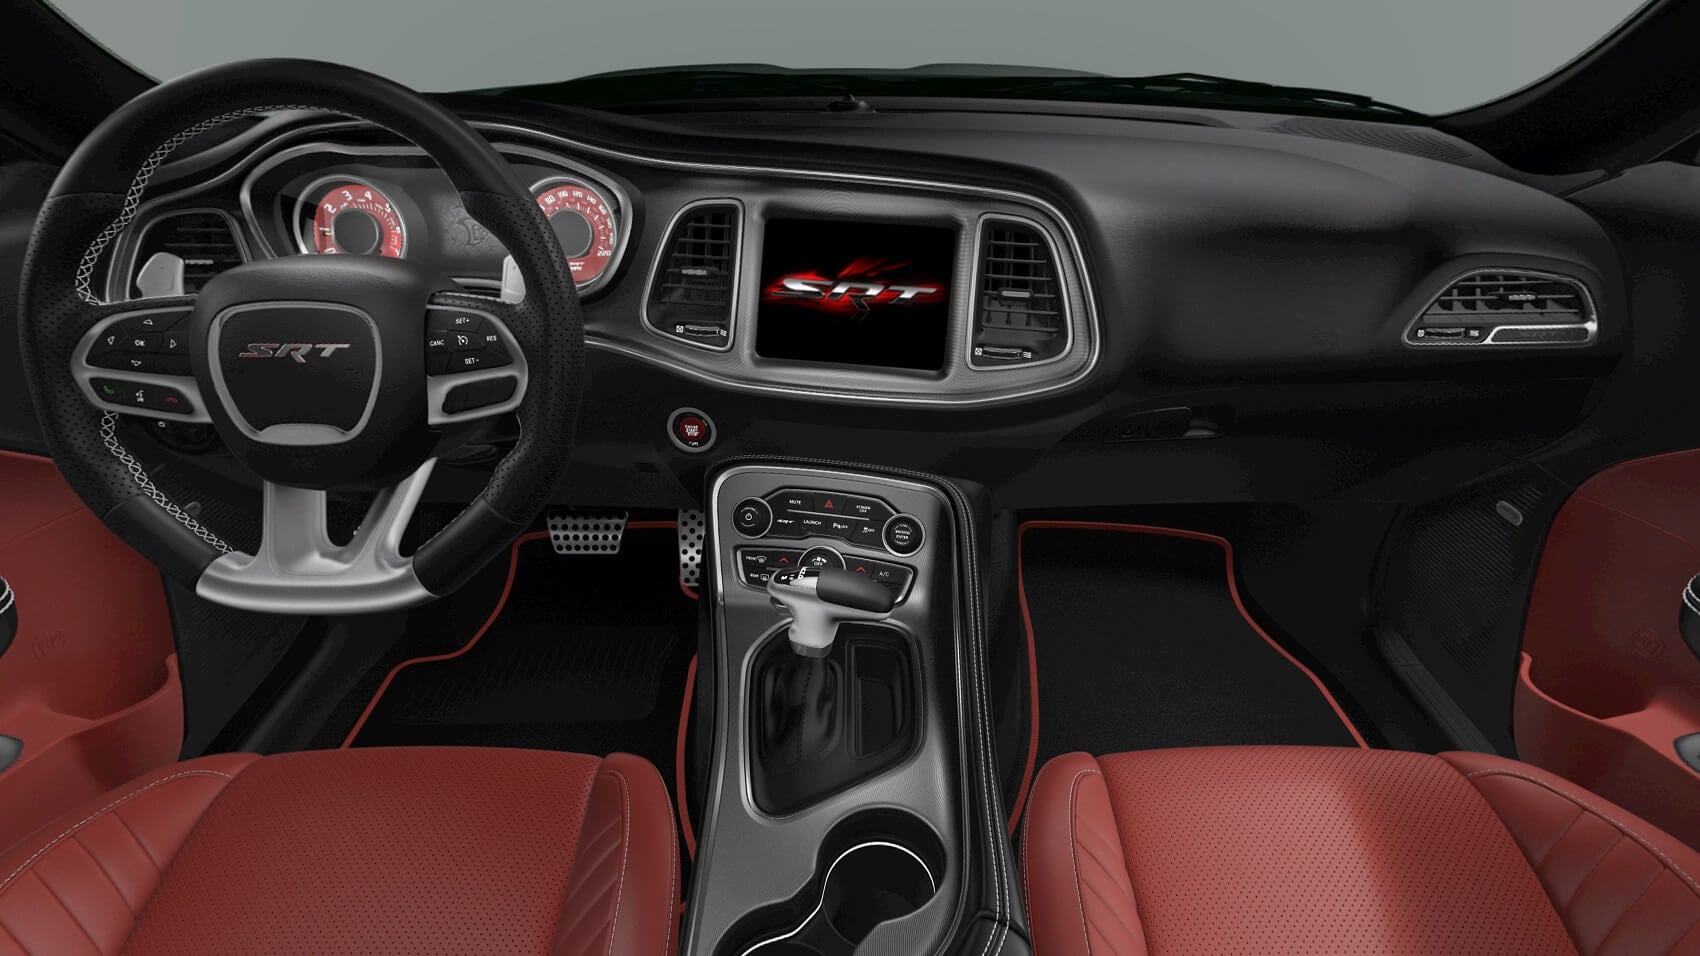 2022 Dodge Challenger SRT Hellcat: A Look at Convenience and Safety